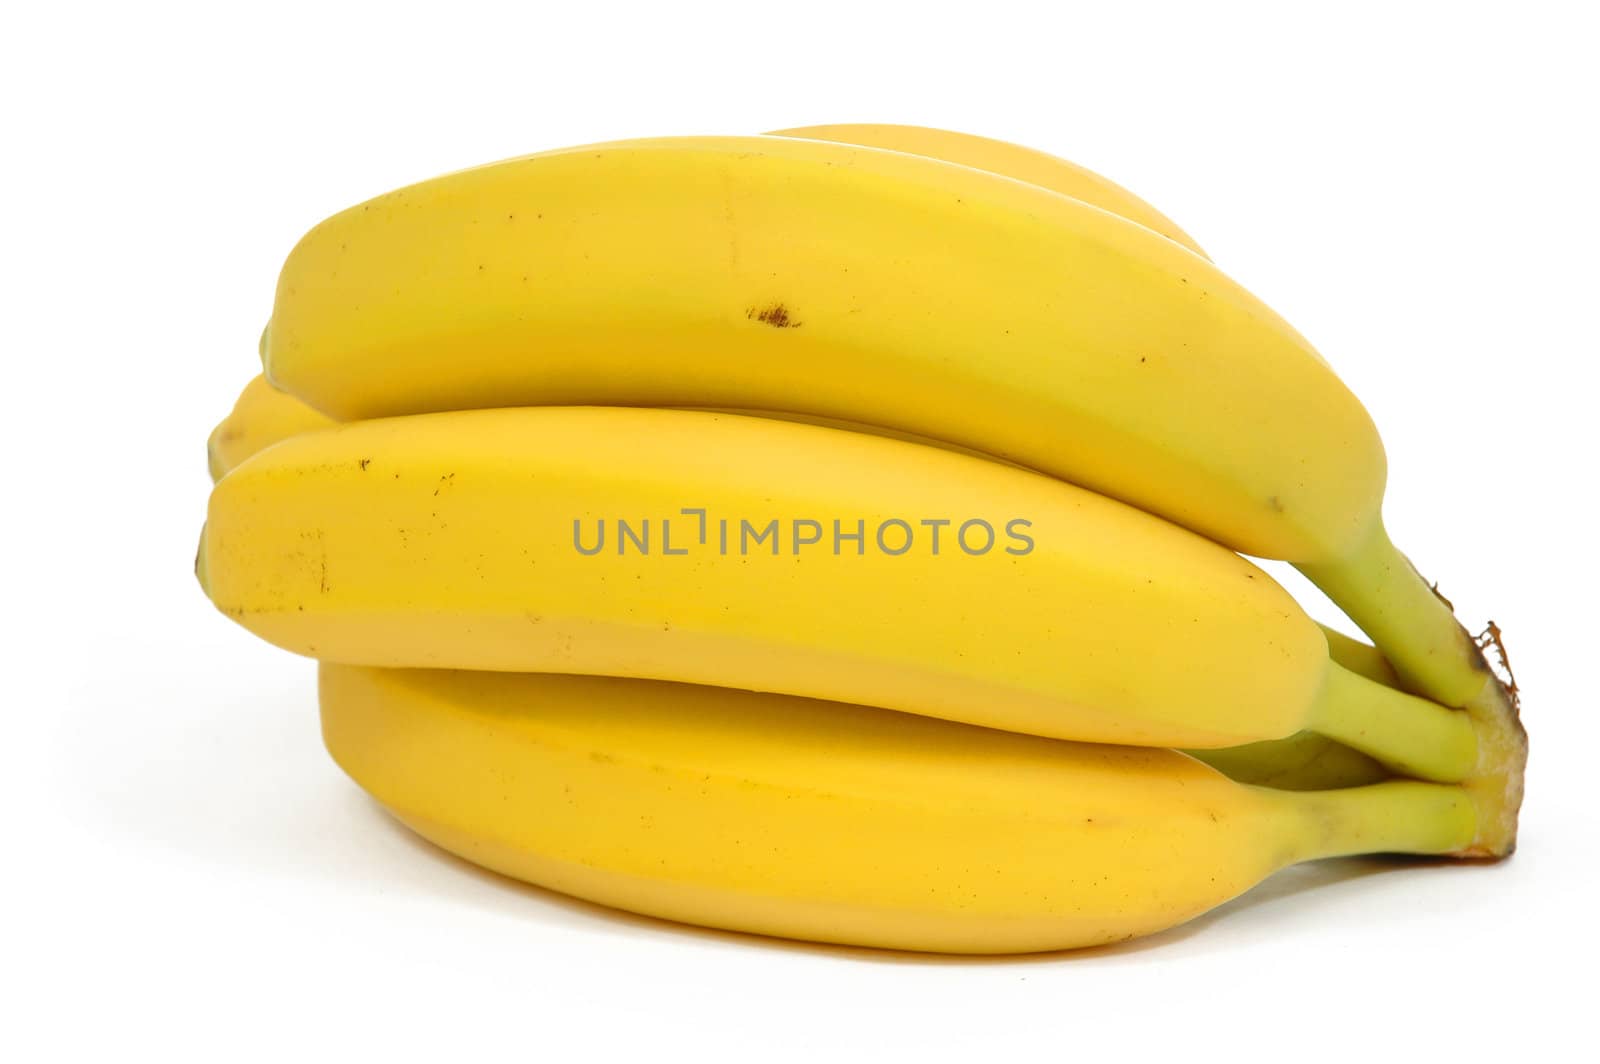 Yellow bananas in a bunch. The bananas are taken on a clrean white background.